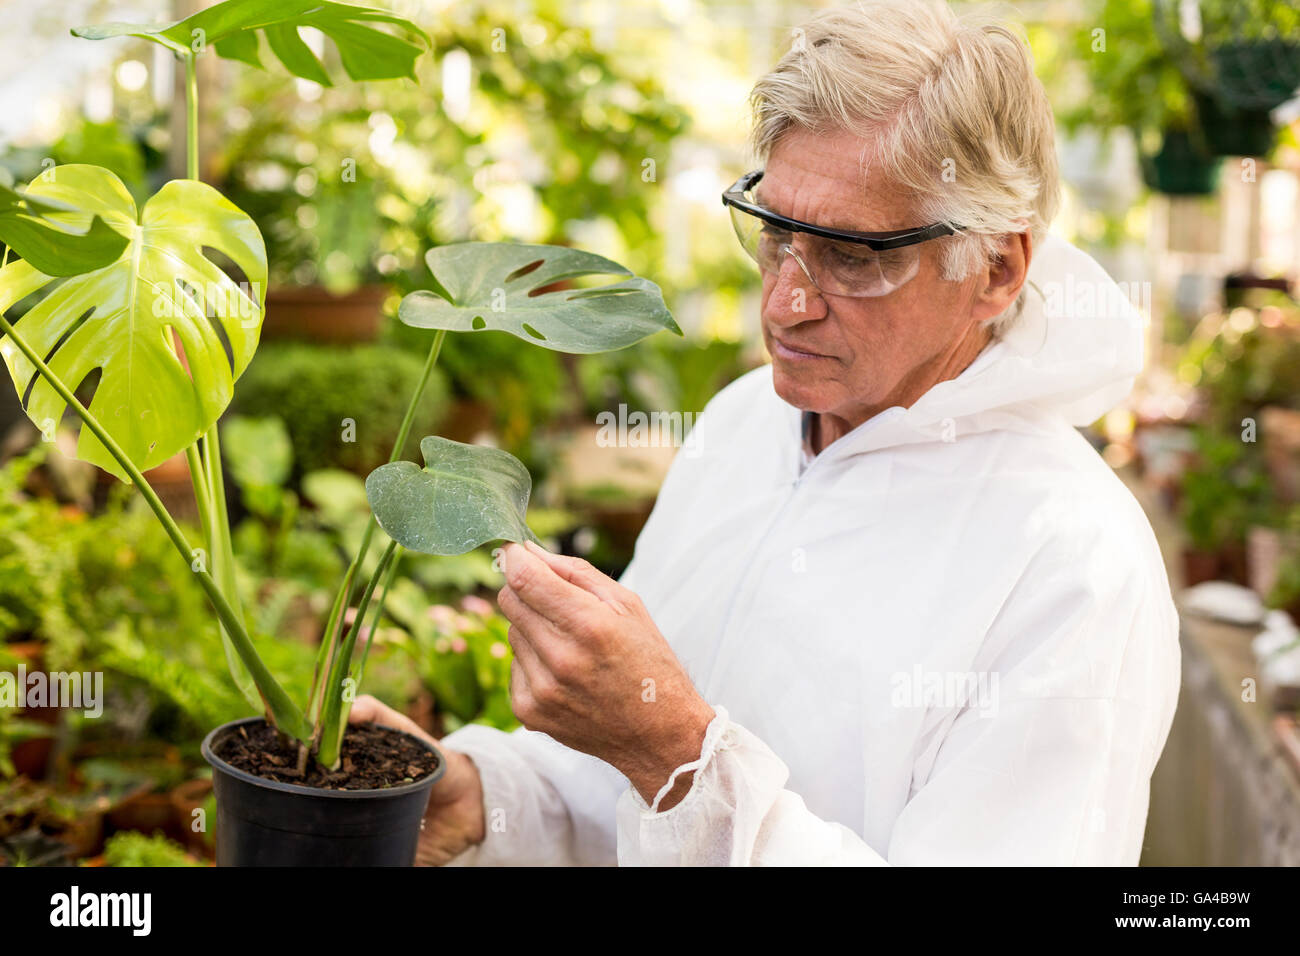 Male scientist in clean suit examining plant leaves Stock Photo